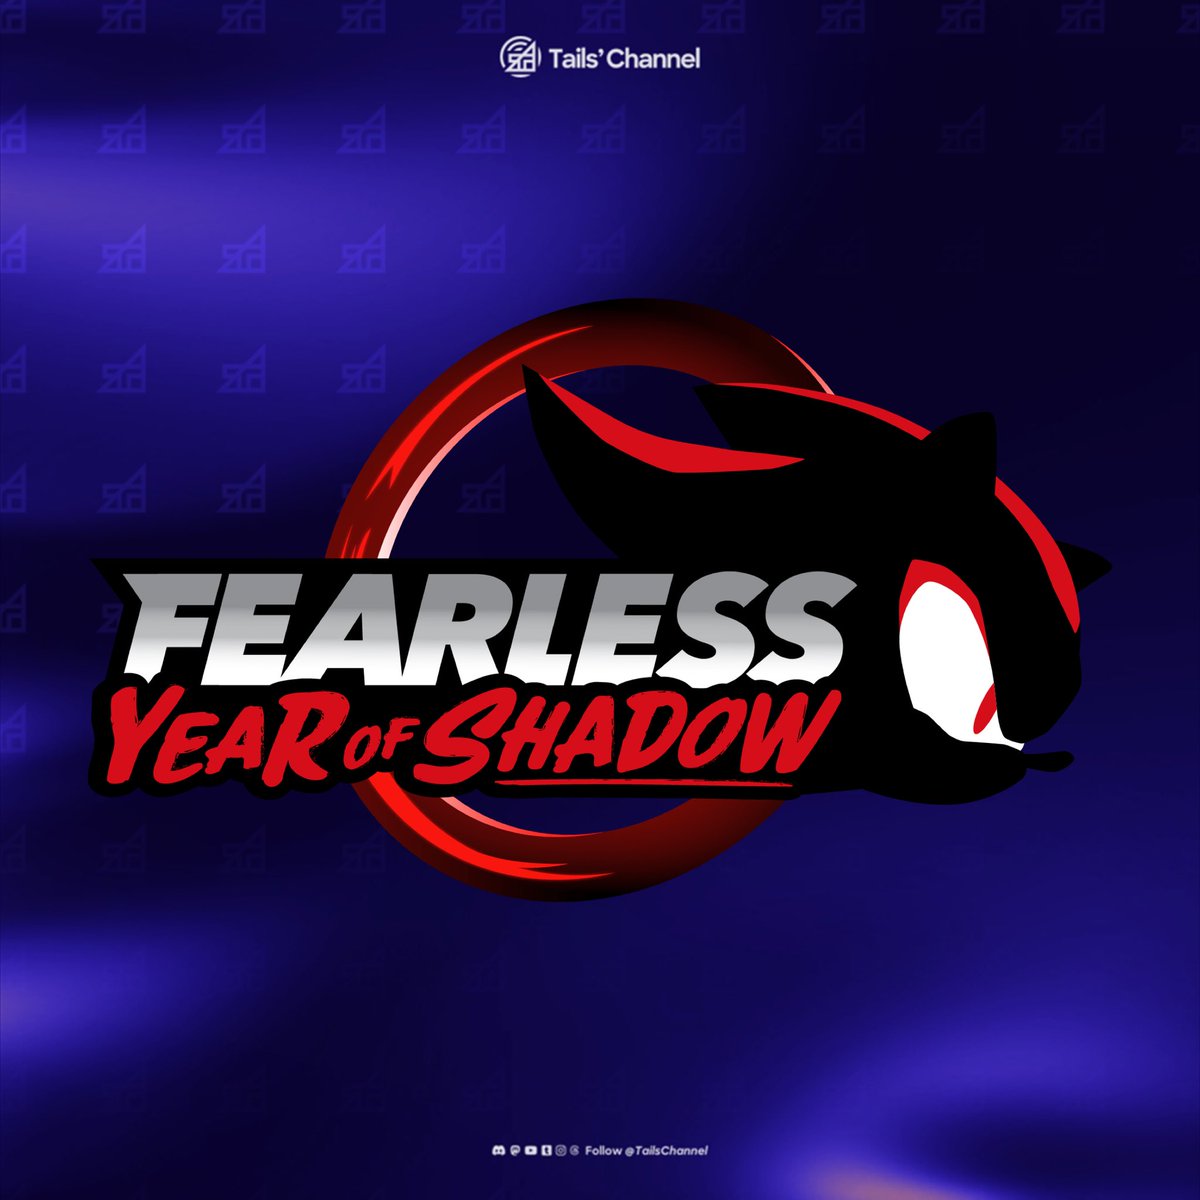 Here’s the Fearless Year of Shadow logo. “BREAK BARRIERS BE UNAFRAID BE AT YOUR BEST AND DO IT ALL WITH A POWERFUL CONFIDENCE.” #SonicNews